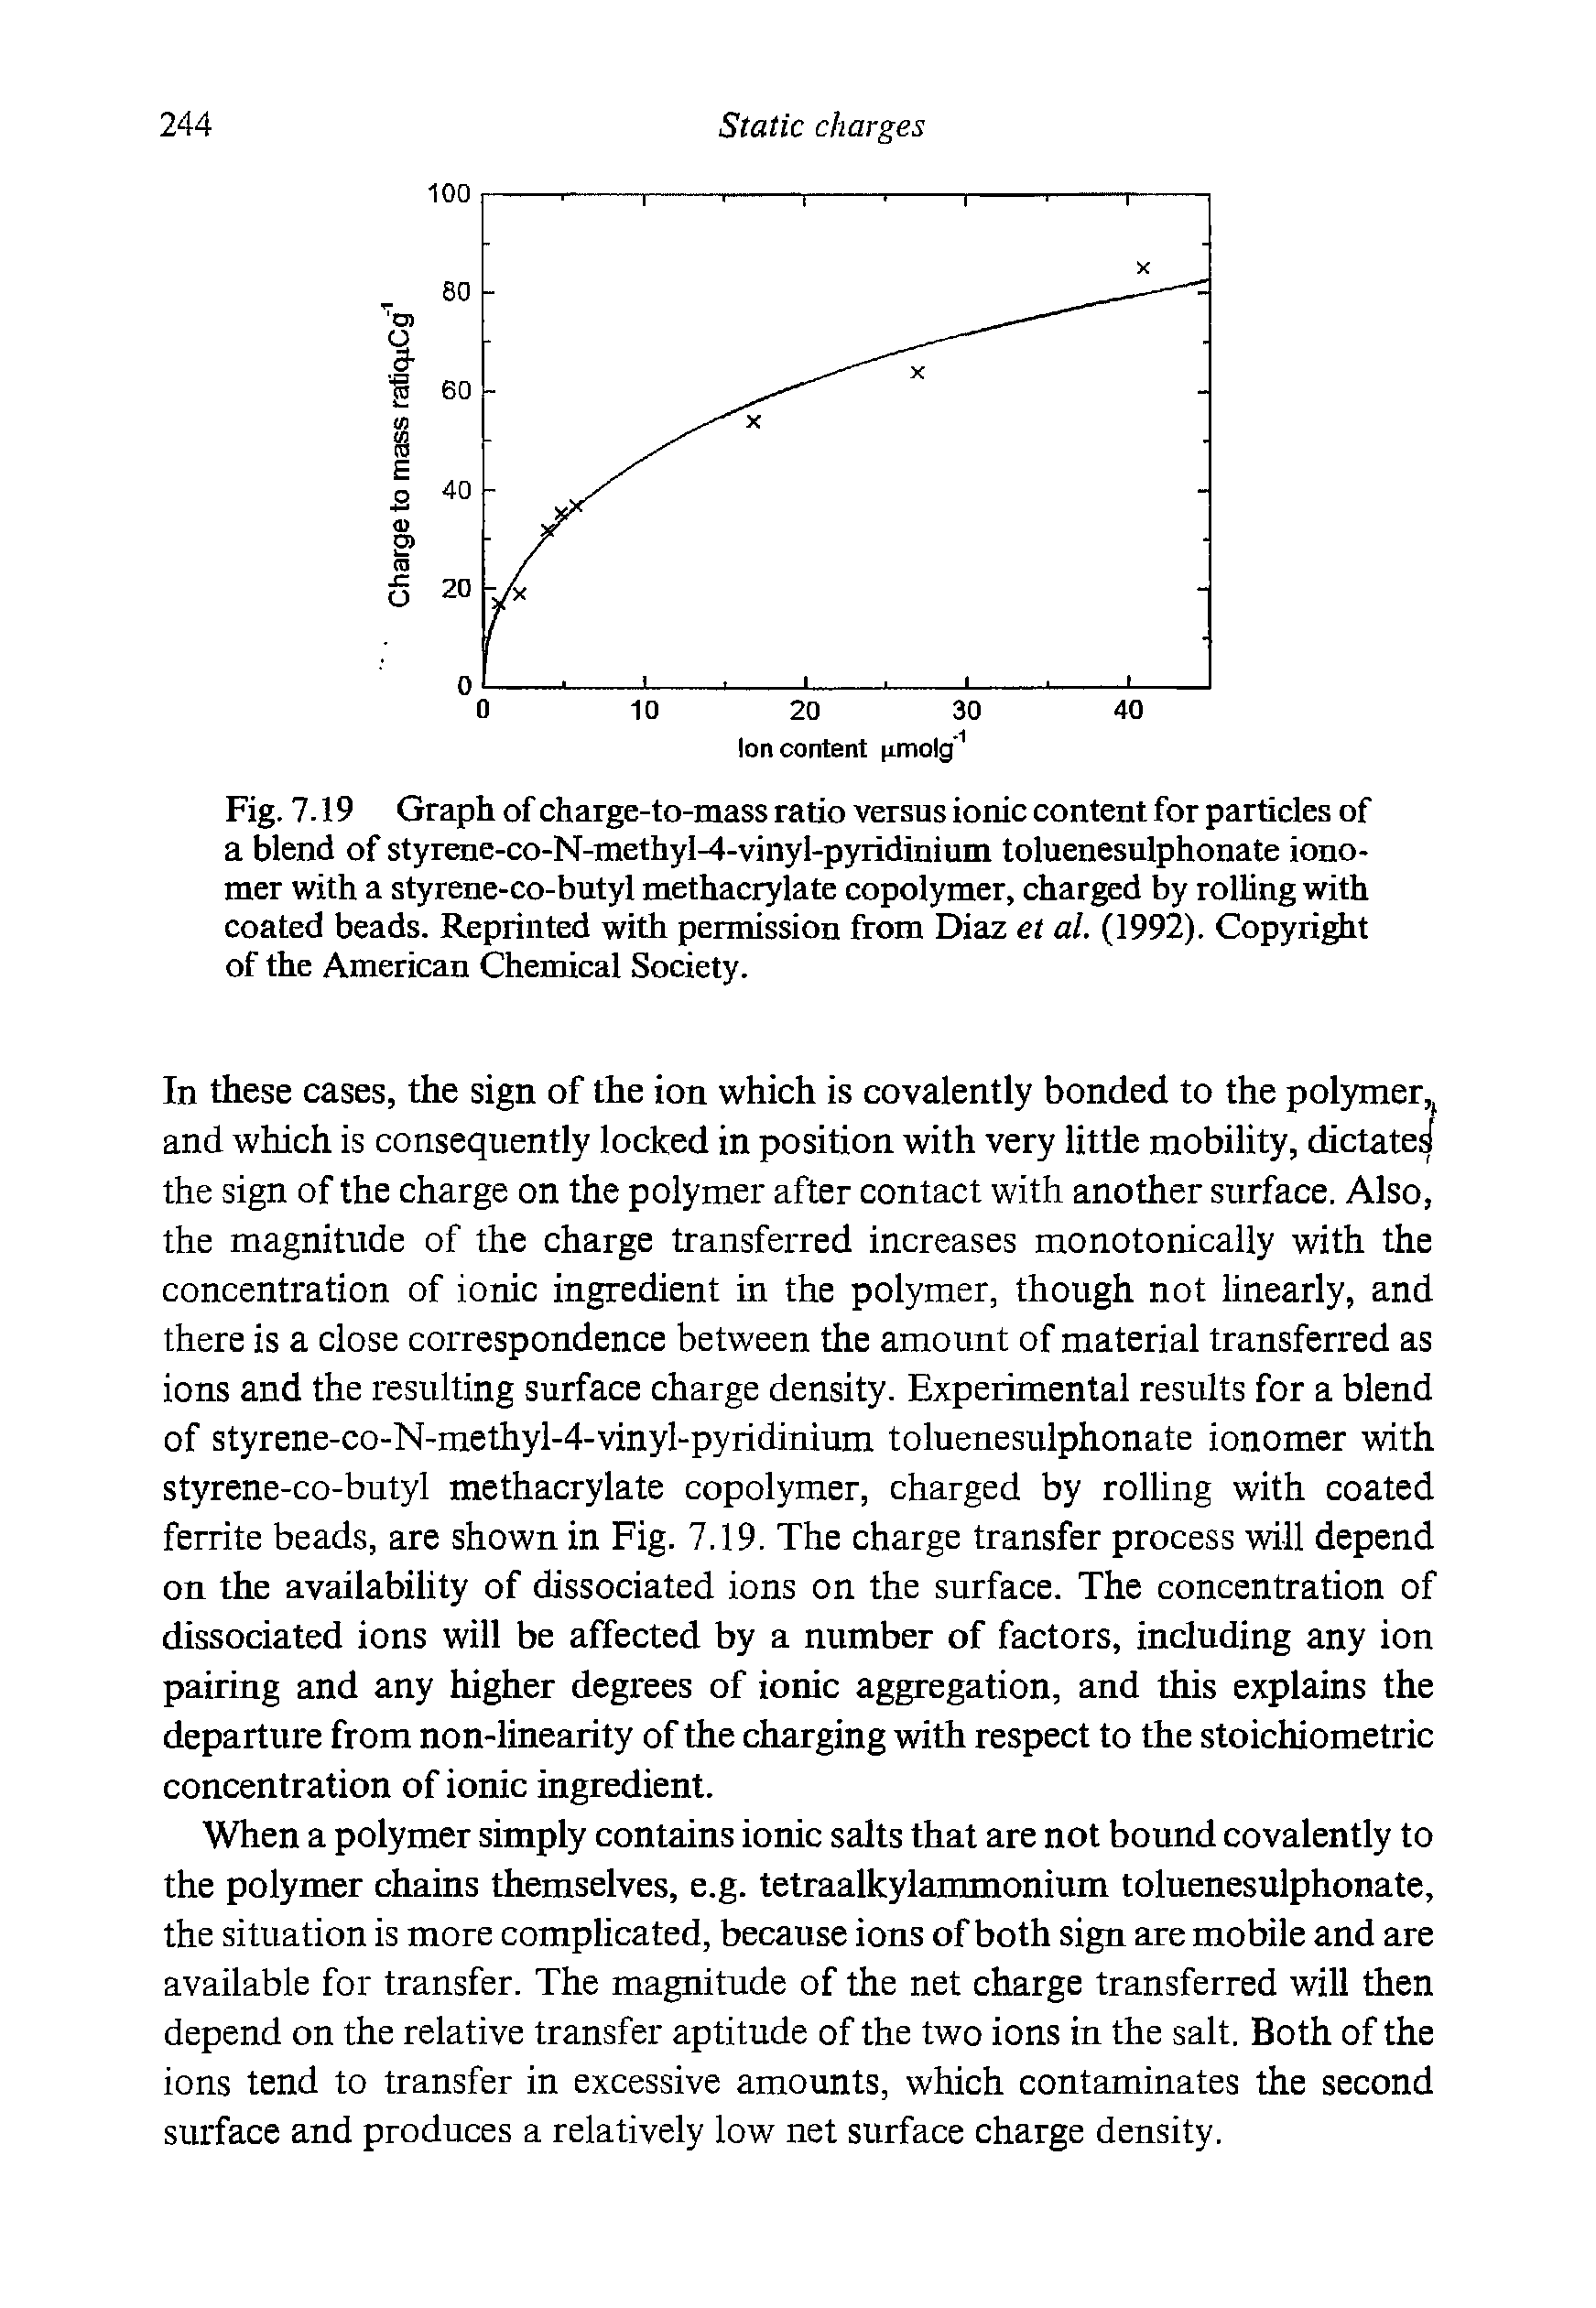 Fig. 7.19 Graph of charge-to-mass ratio versus ionic content for particles of a blend of styrene-co-N-methyl-4-vinyl-pyridinium toluenesulphonate iono-mer with a styrene-co-butyl methacrylate copolymer, charged by rolling with coated beads. Reprinted with permission from Diaz et al. (1992). Copyright of the American Chemical Society.